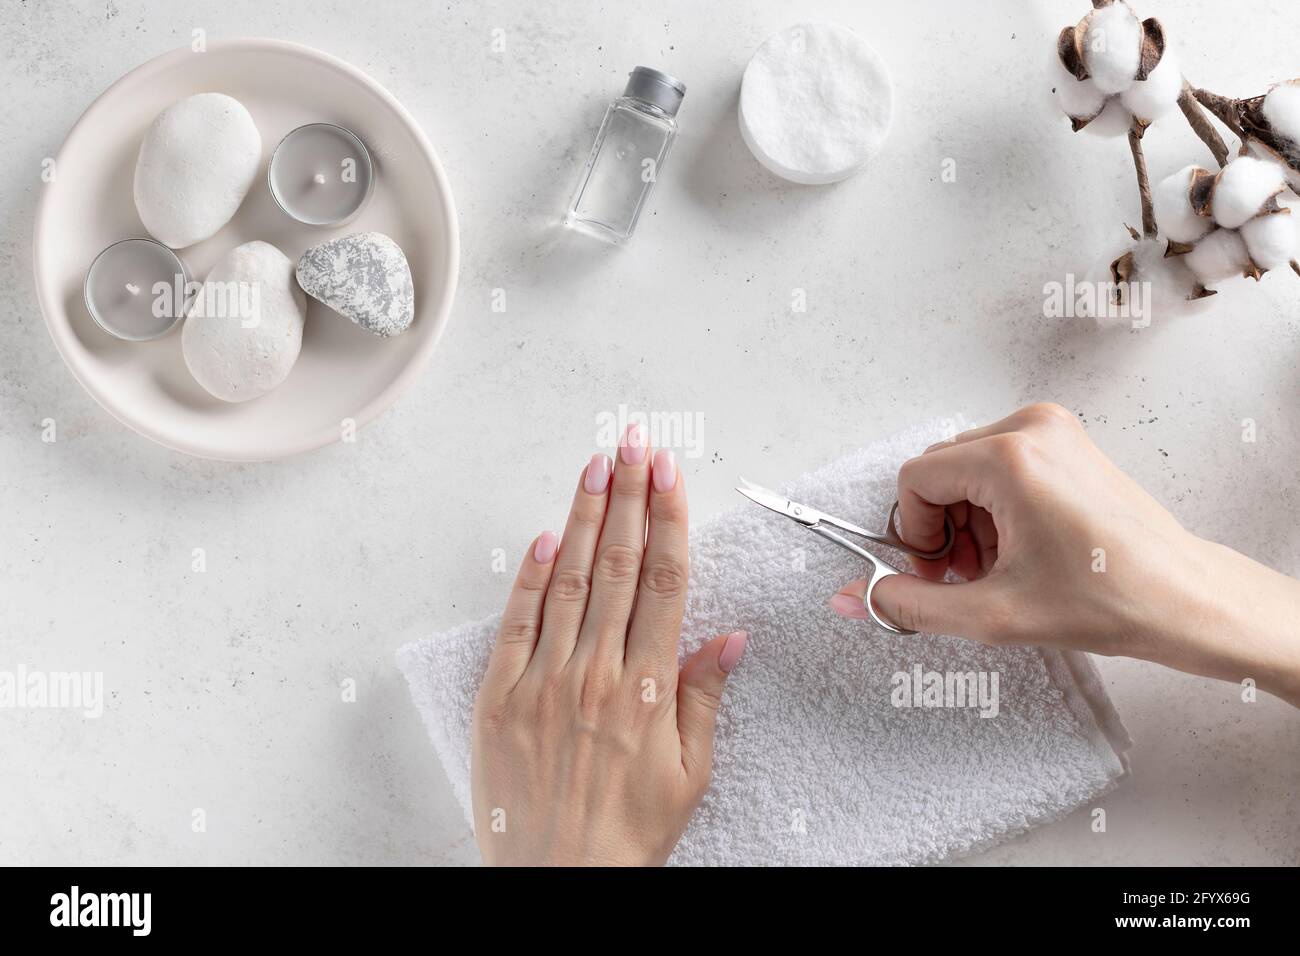 young woman cutting nails with manicure scissors. hygiene concept. White background with candles and cotton flower. view from above. copy space Stock Photo